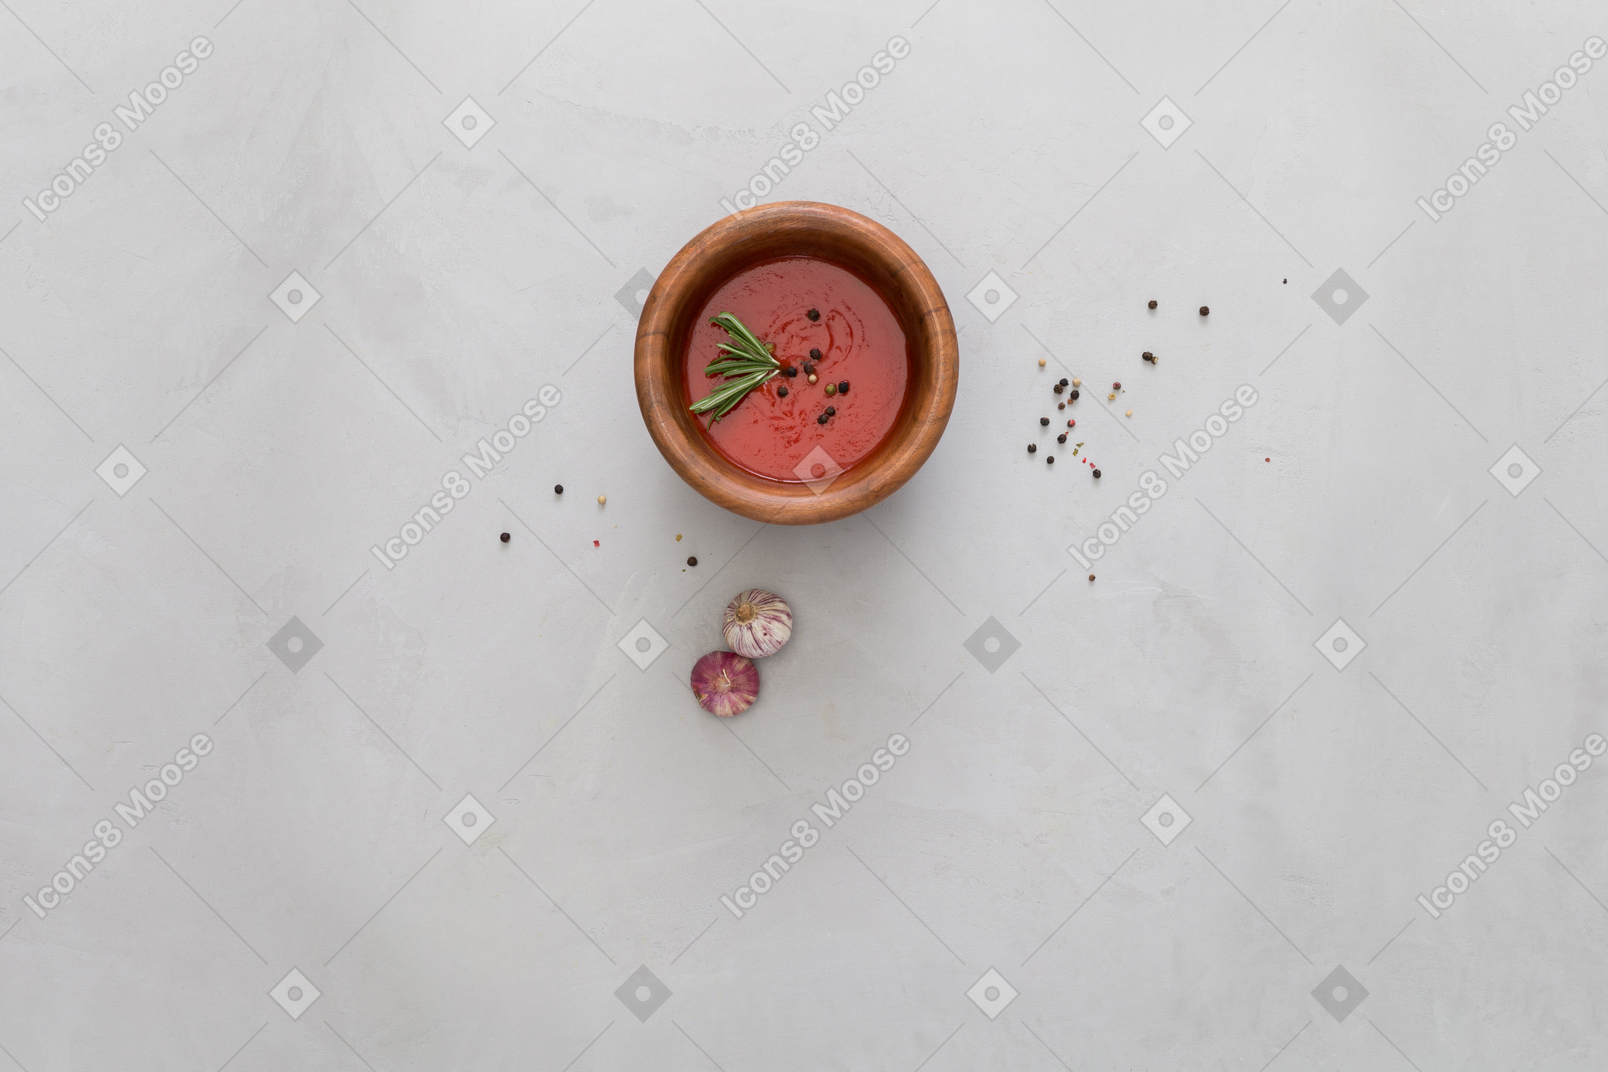 A bowl of gazpacho and some garlic